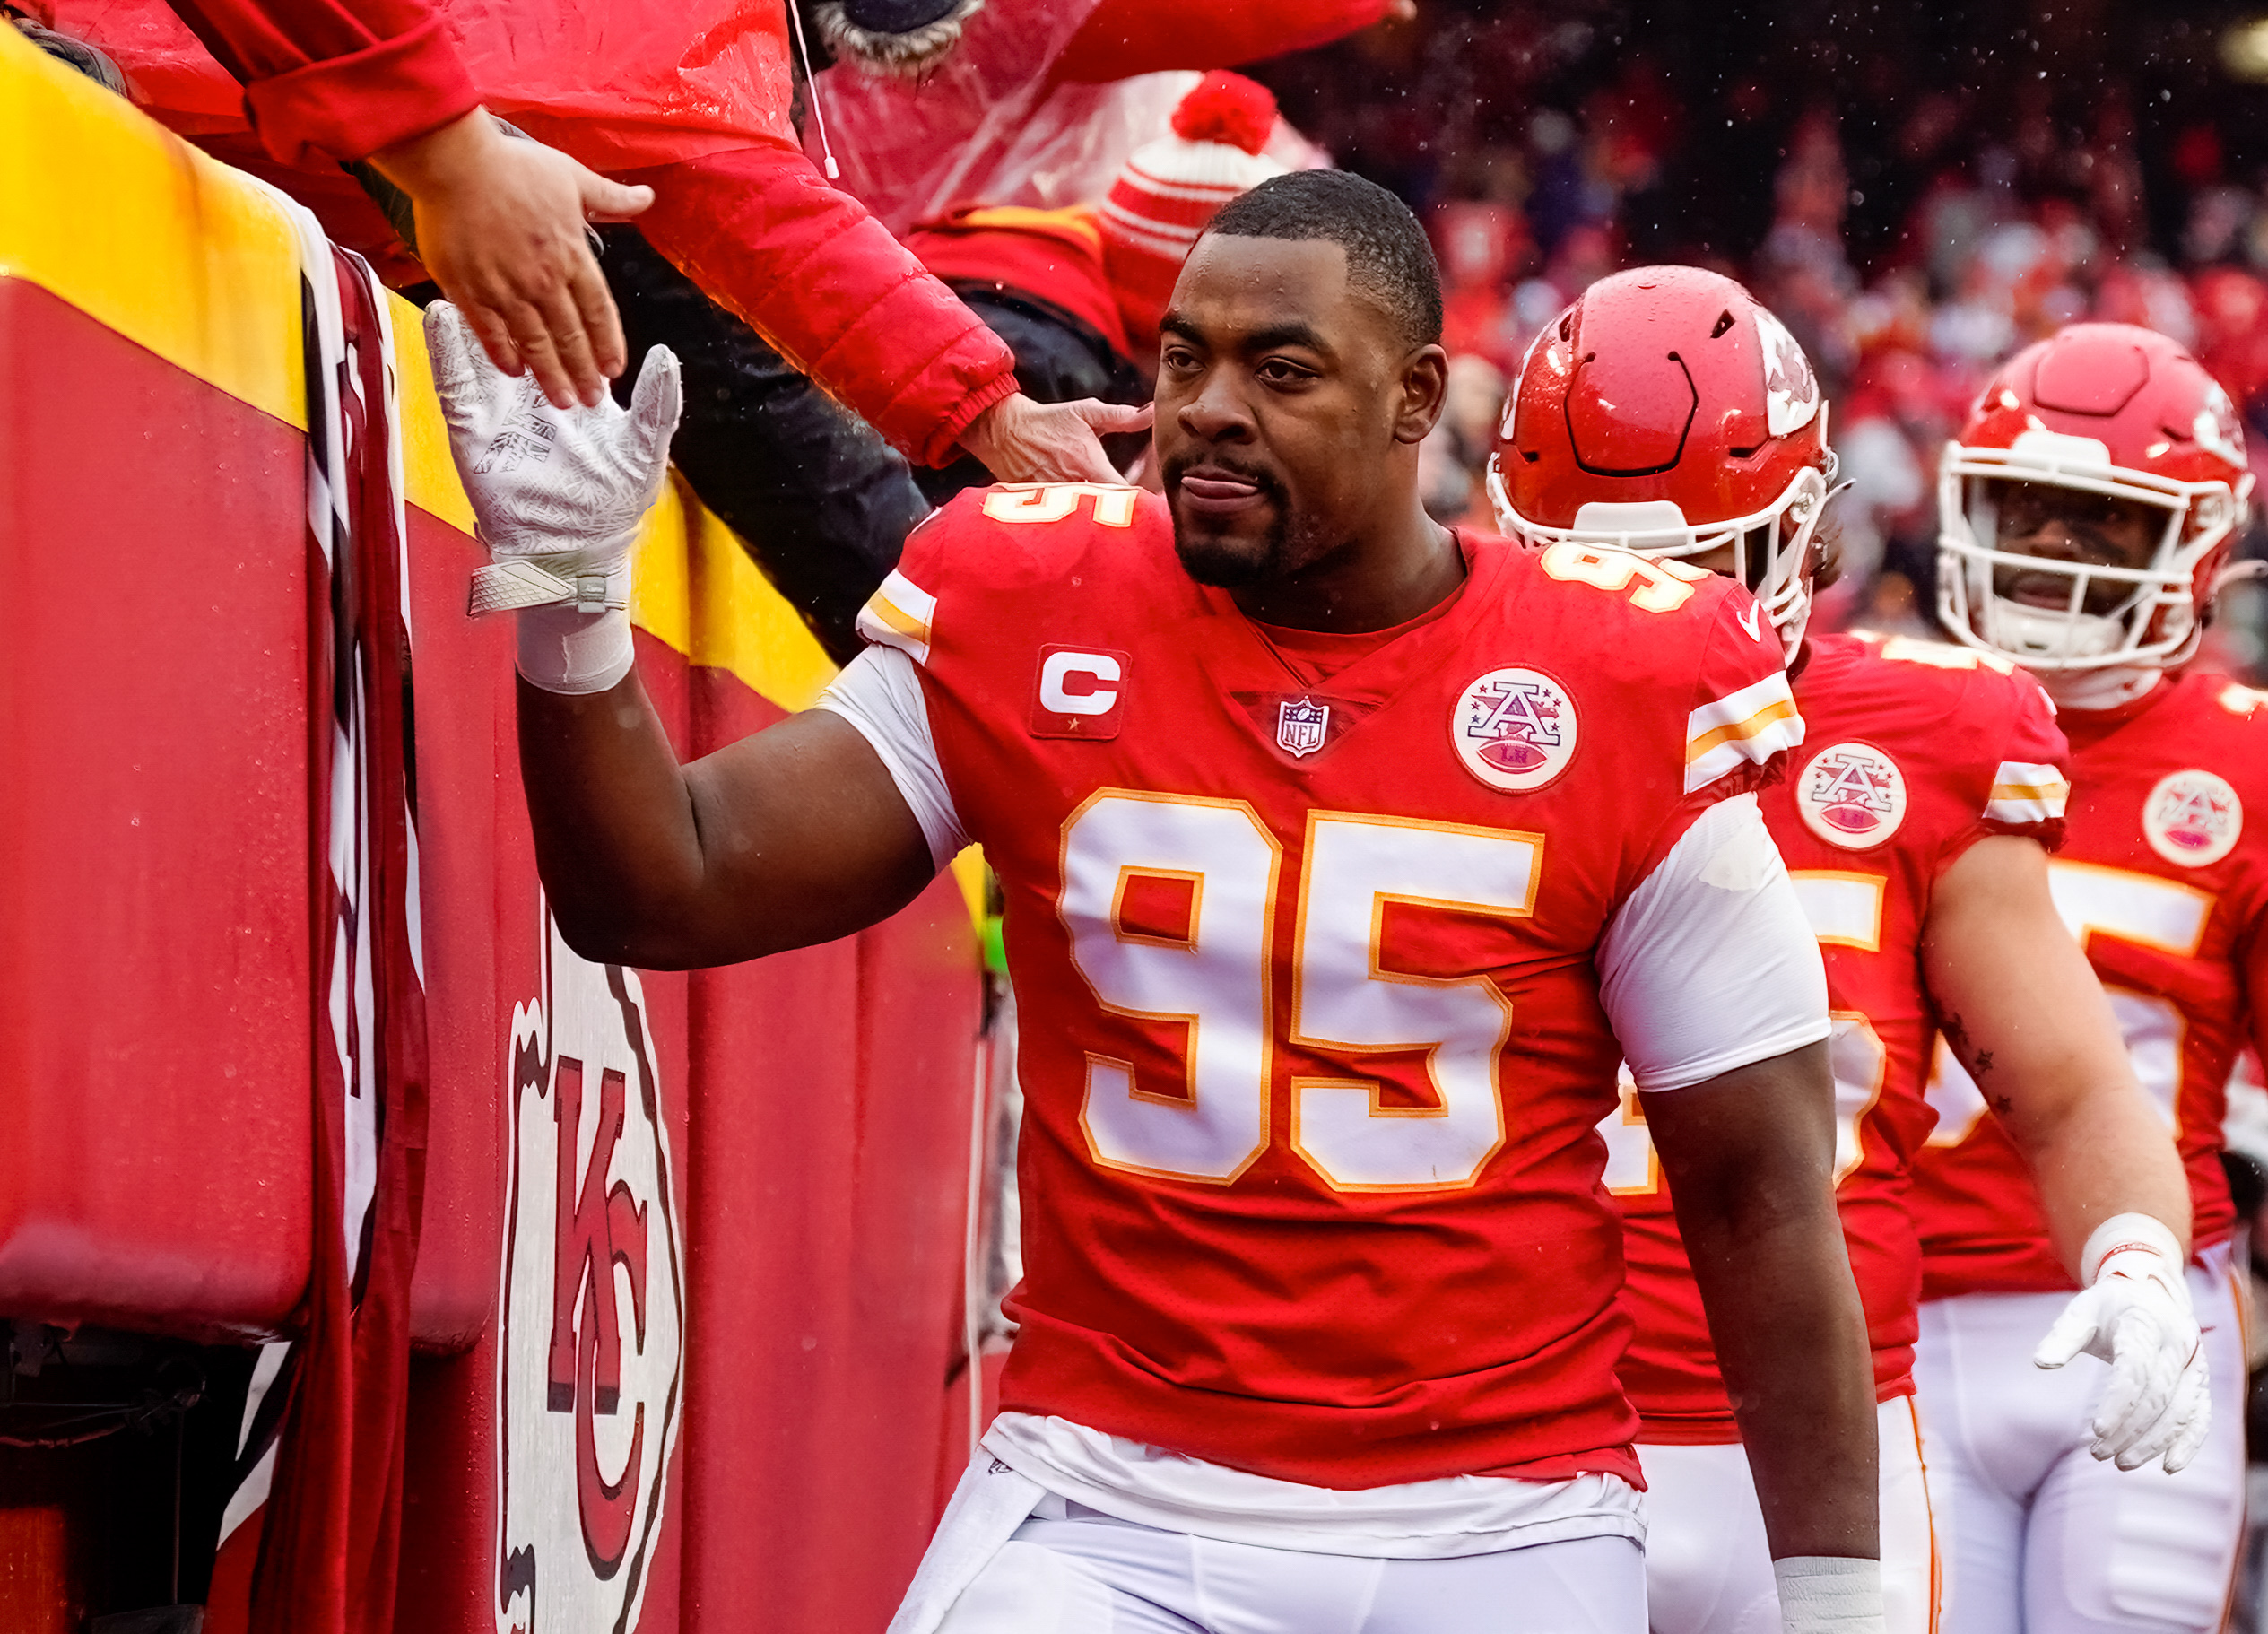 Kansas City Chiefs Video - NFL Full Game Replays, Highlights, Live